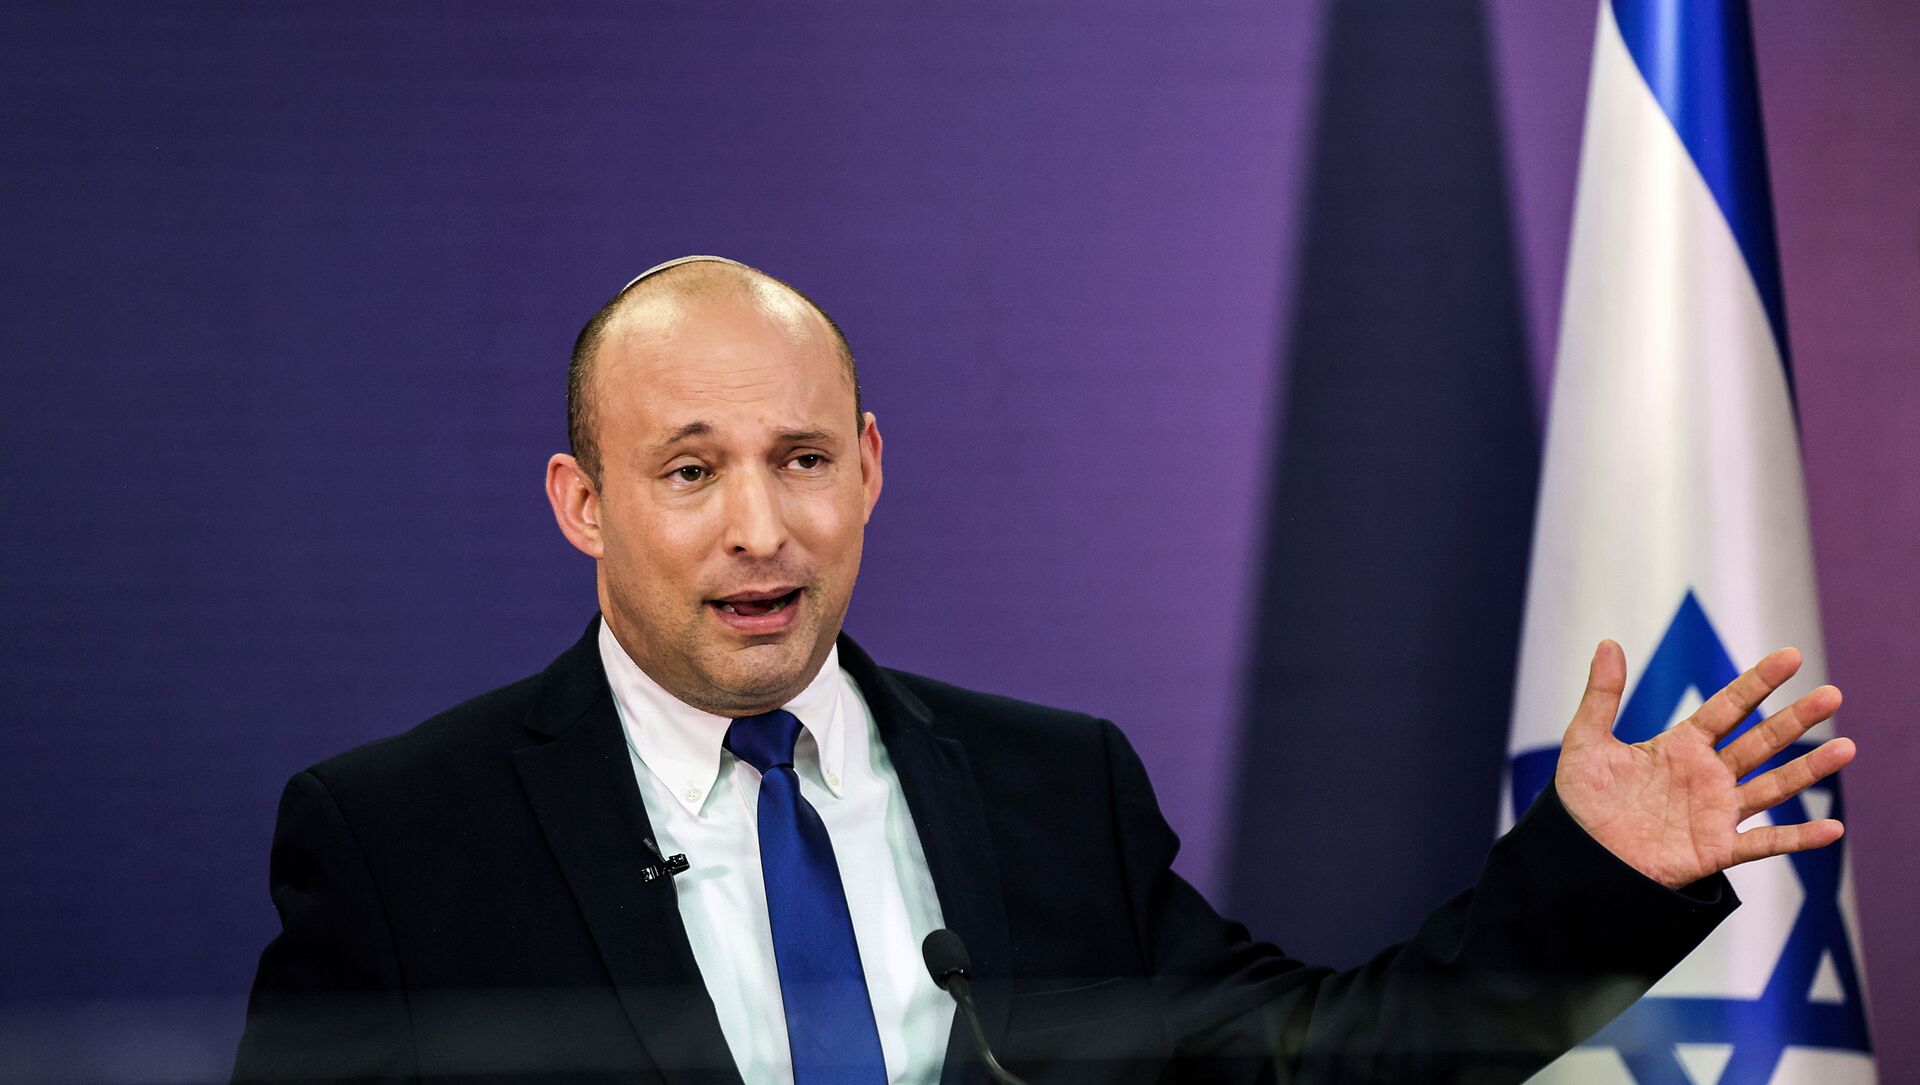 Naftali Bennett, Israeli parliament member from the Yamina party, gestures as he gives a statement at the Knesset, Israel's parliament, in Jerusalem, June 6, 2021 - Sputnik International, 1920, 07.06.2021